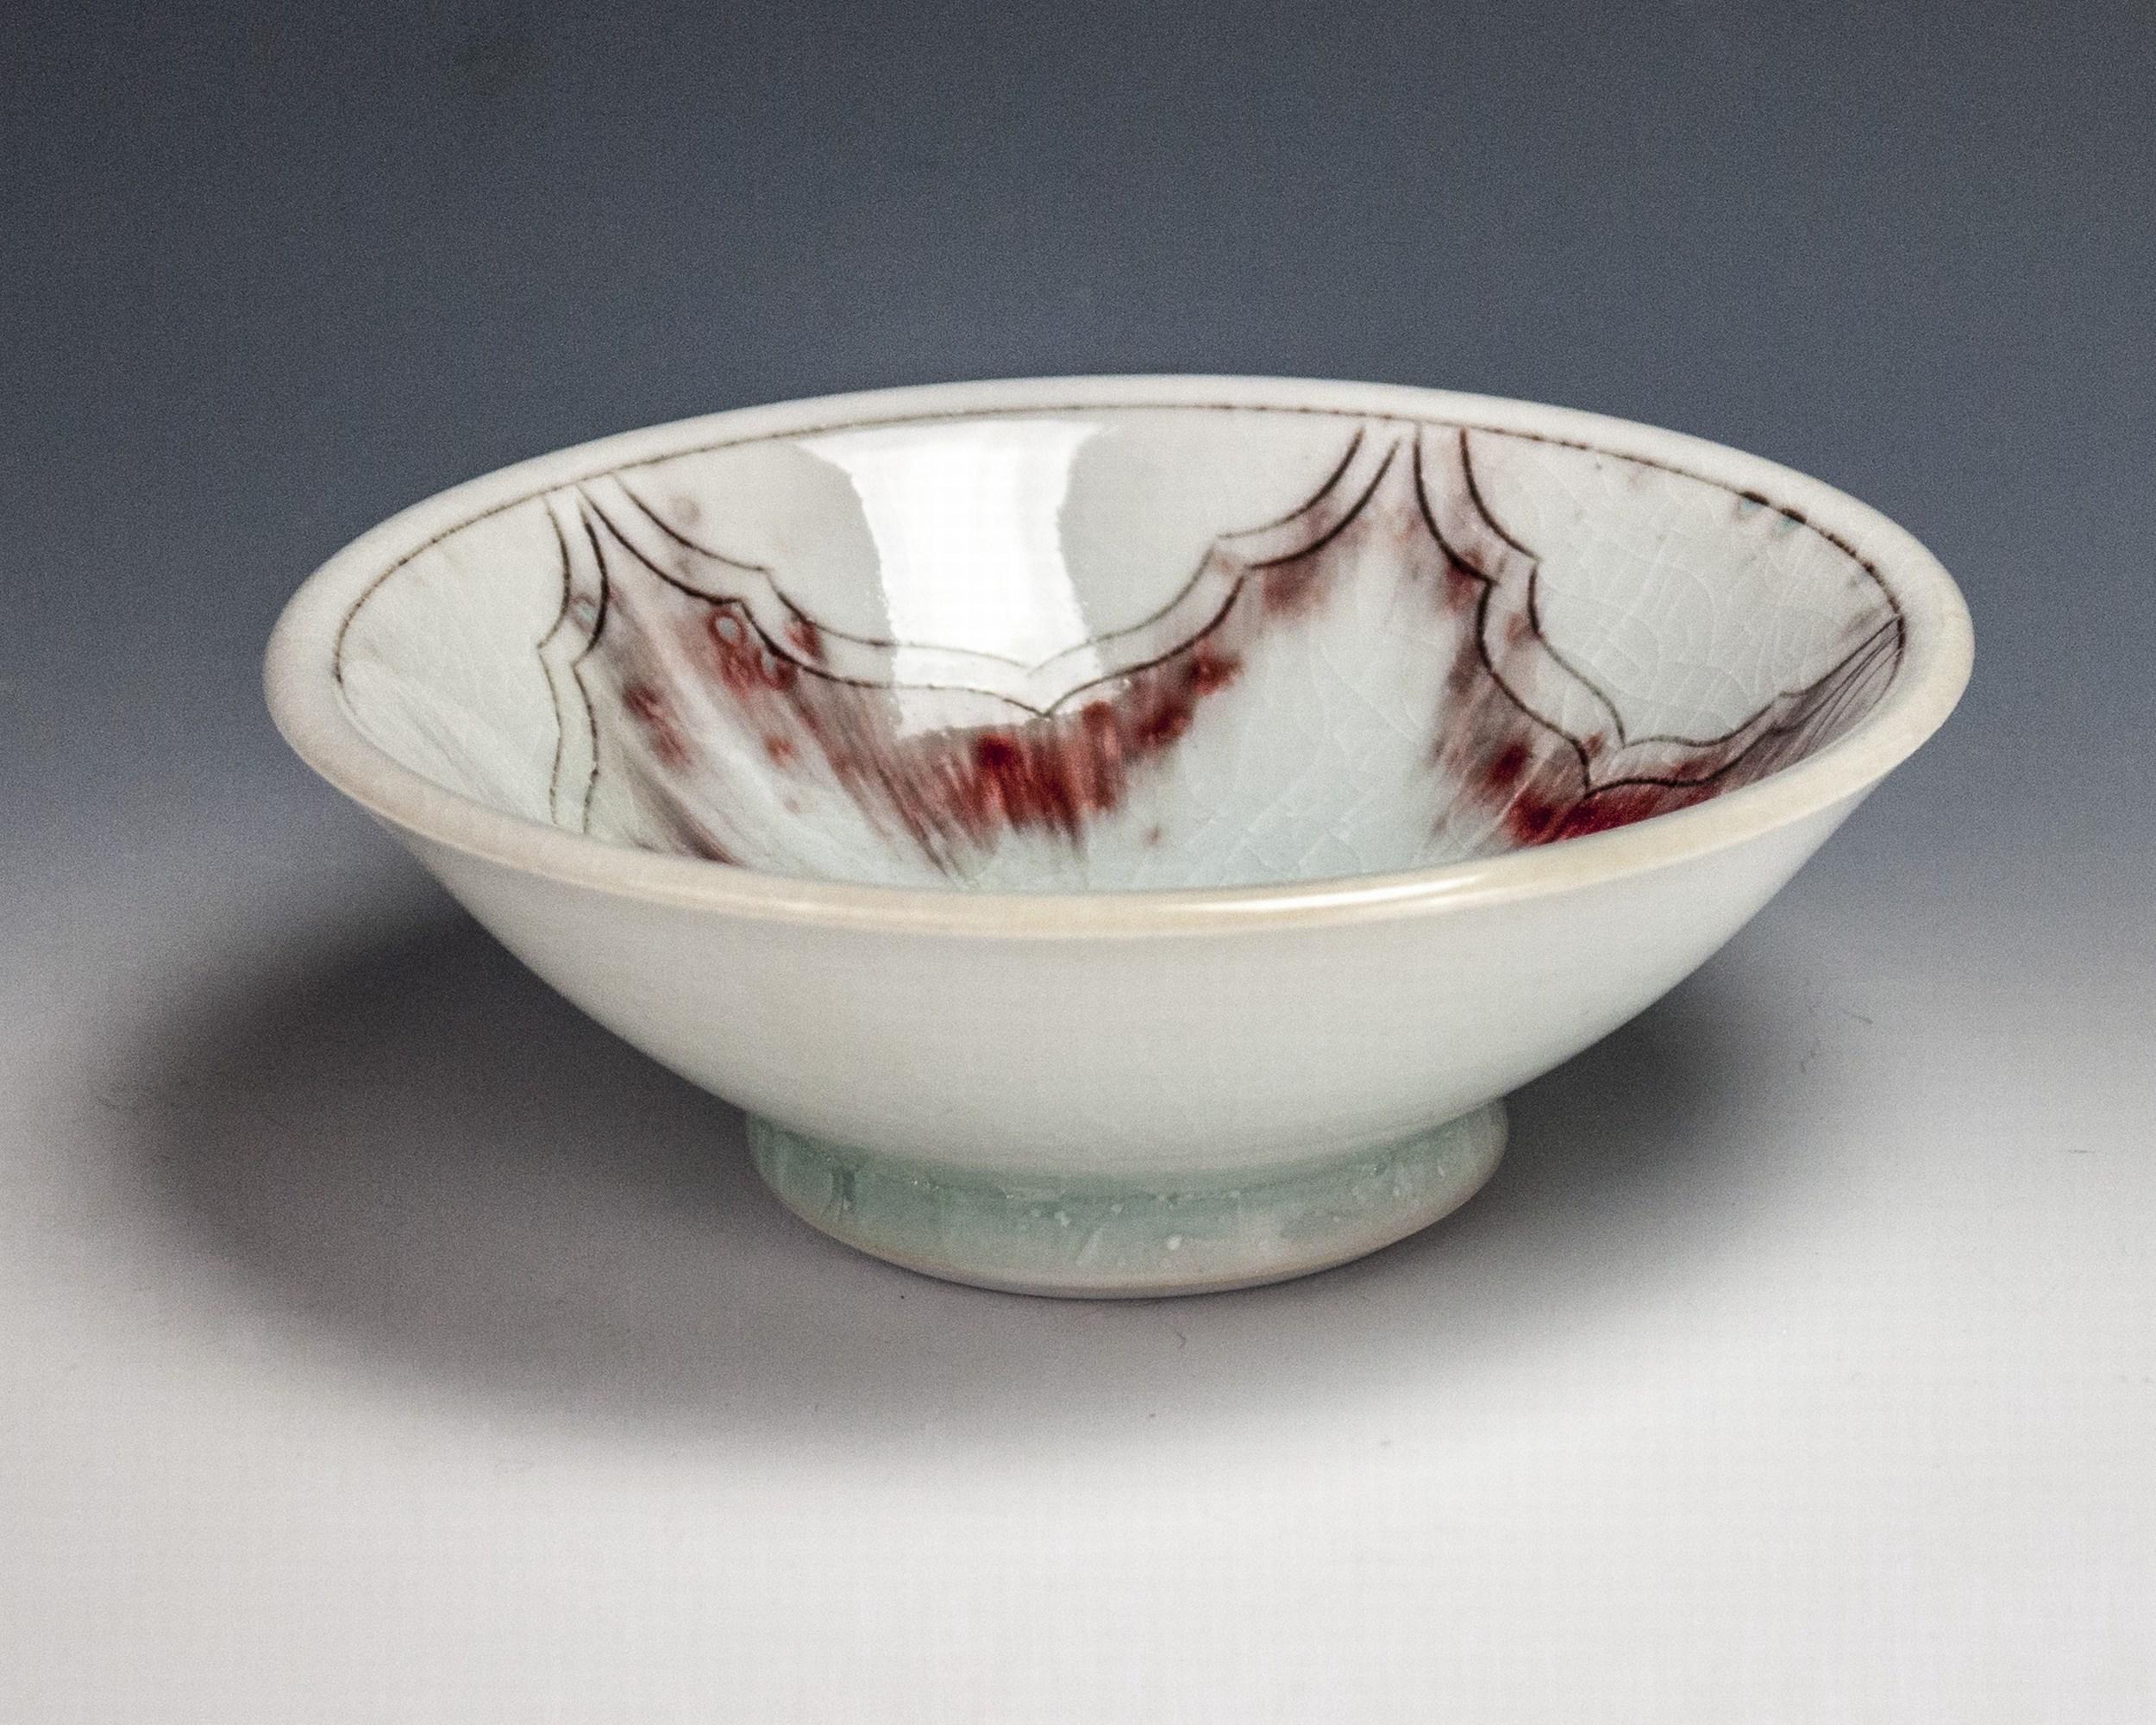 Red Dish
Materials: Porcelain and Glaze
Date: 2018

Steven Young Lee has been the resident artist director of the Archie Bray Foundation for the Ceramic Arts in Helena, Montana since 2006. In 2004-05, he lectured and taught at numerous universities